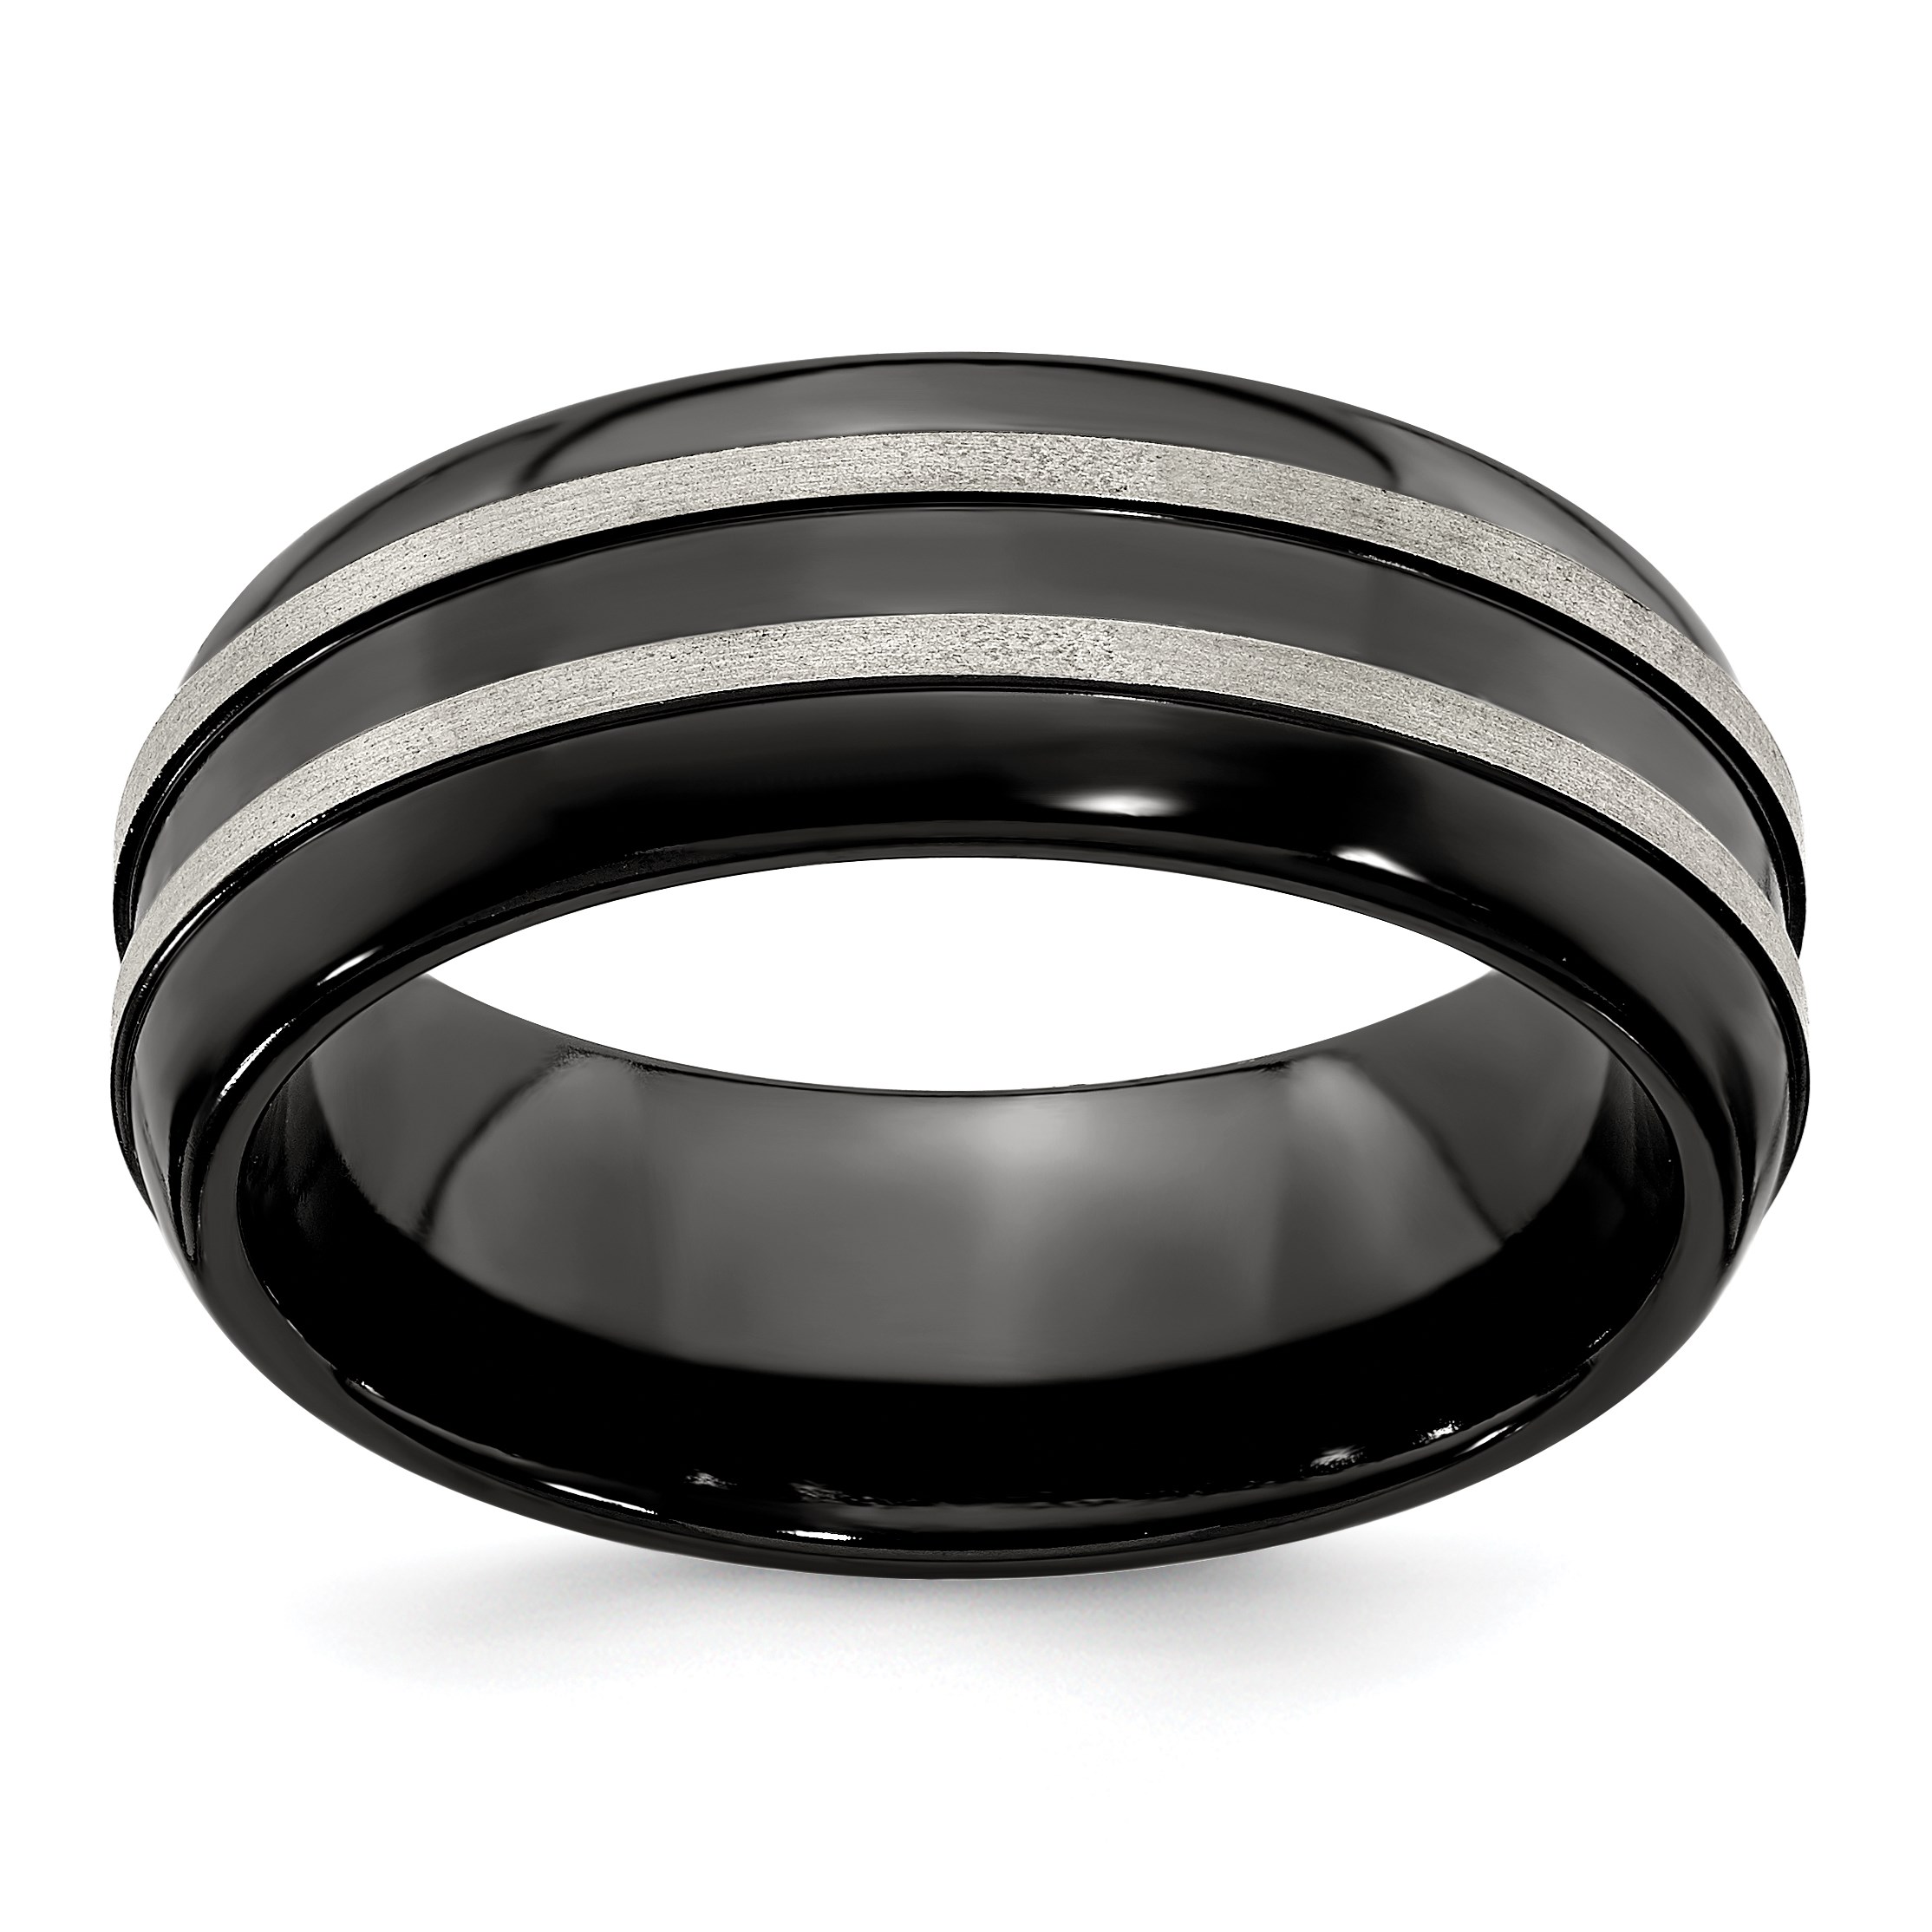 Mens Jewelry and Accessories Edward Mirell Titanium Faceted Edge Brushed & Polished 12mm Ring 